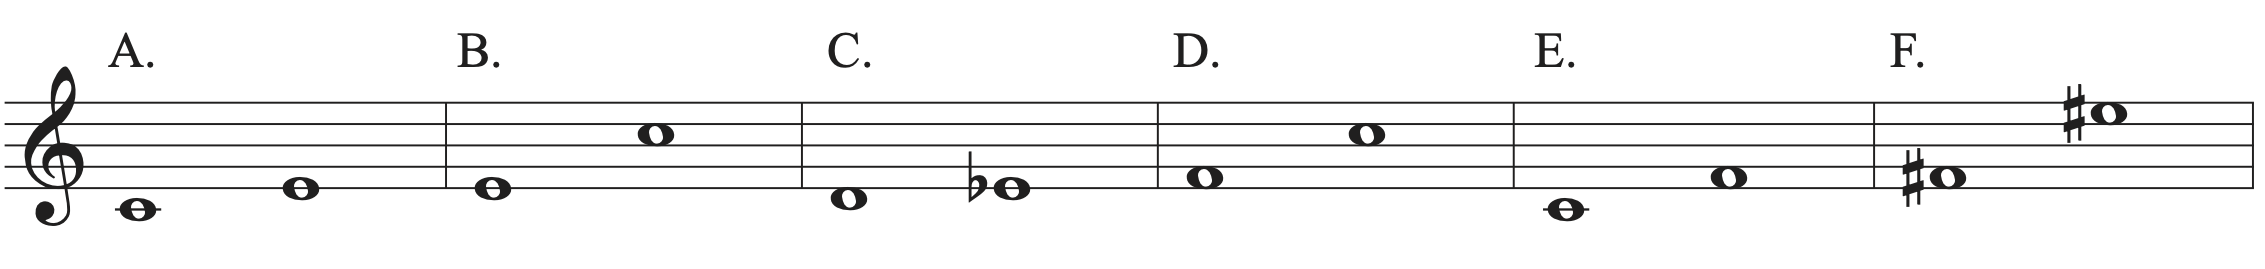 Example A is an ascending interval from C to E. Example B is an ascending interval from E to C. Example C is an ascending interval from D to E-flat. Example D is an ascending interval from F to C. Example E is an ascending interval from C to F. Example F is an ascending interval from F-sharp to E-sharp.